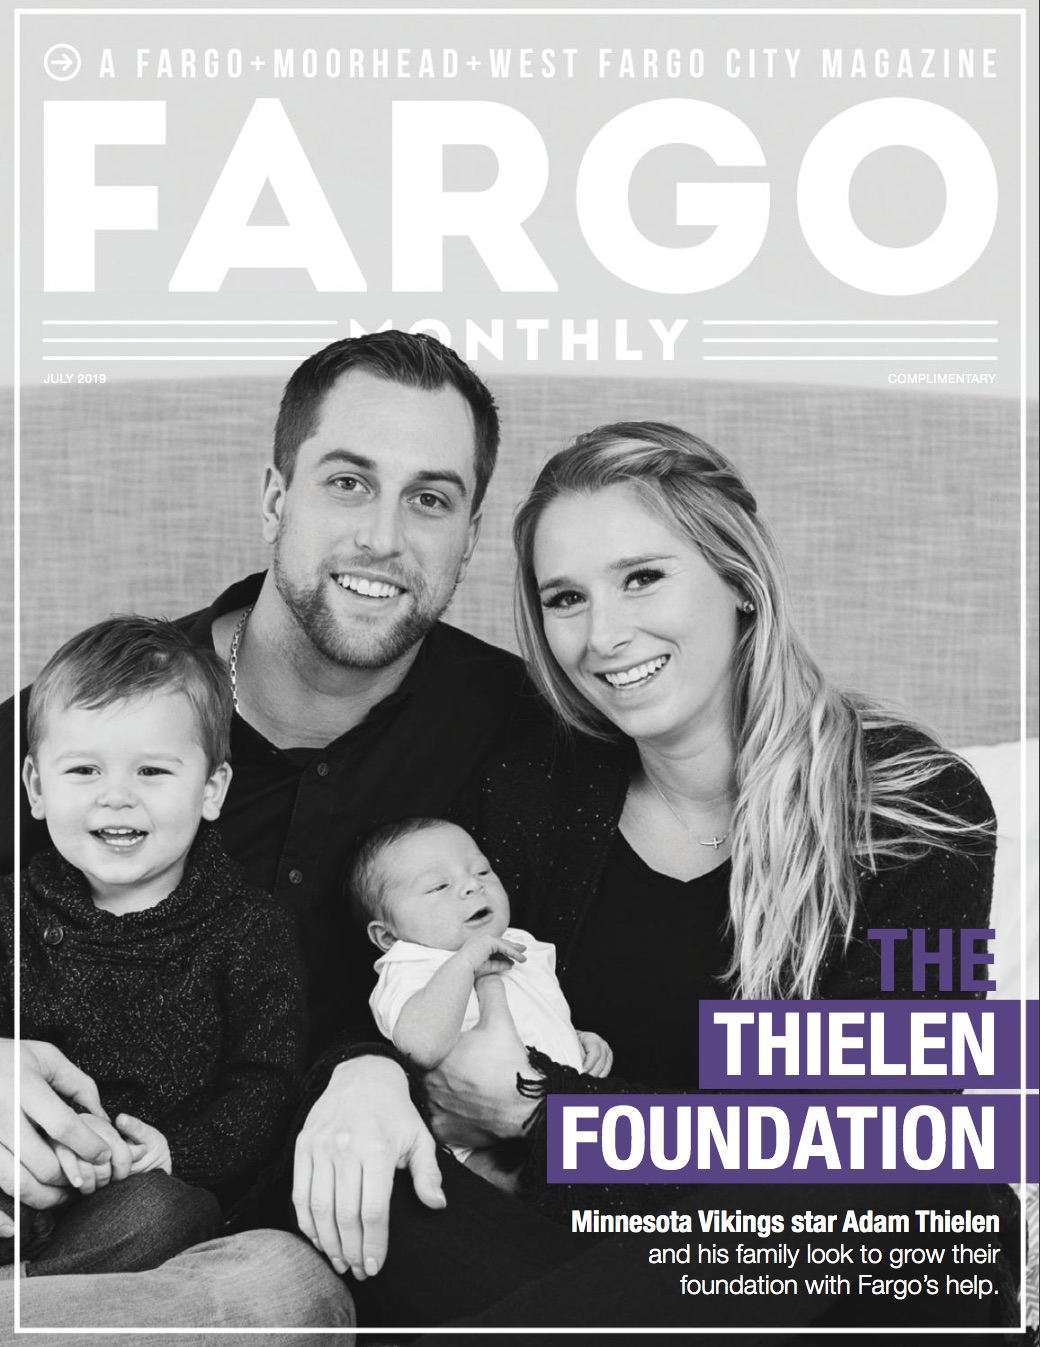 Adam Thielen and his family on the cover of Fargo Monthly to discuss the Thielen Foundation